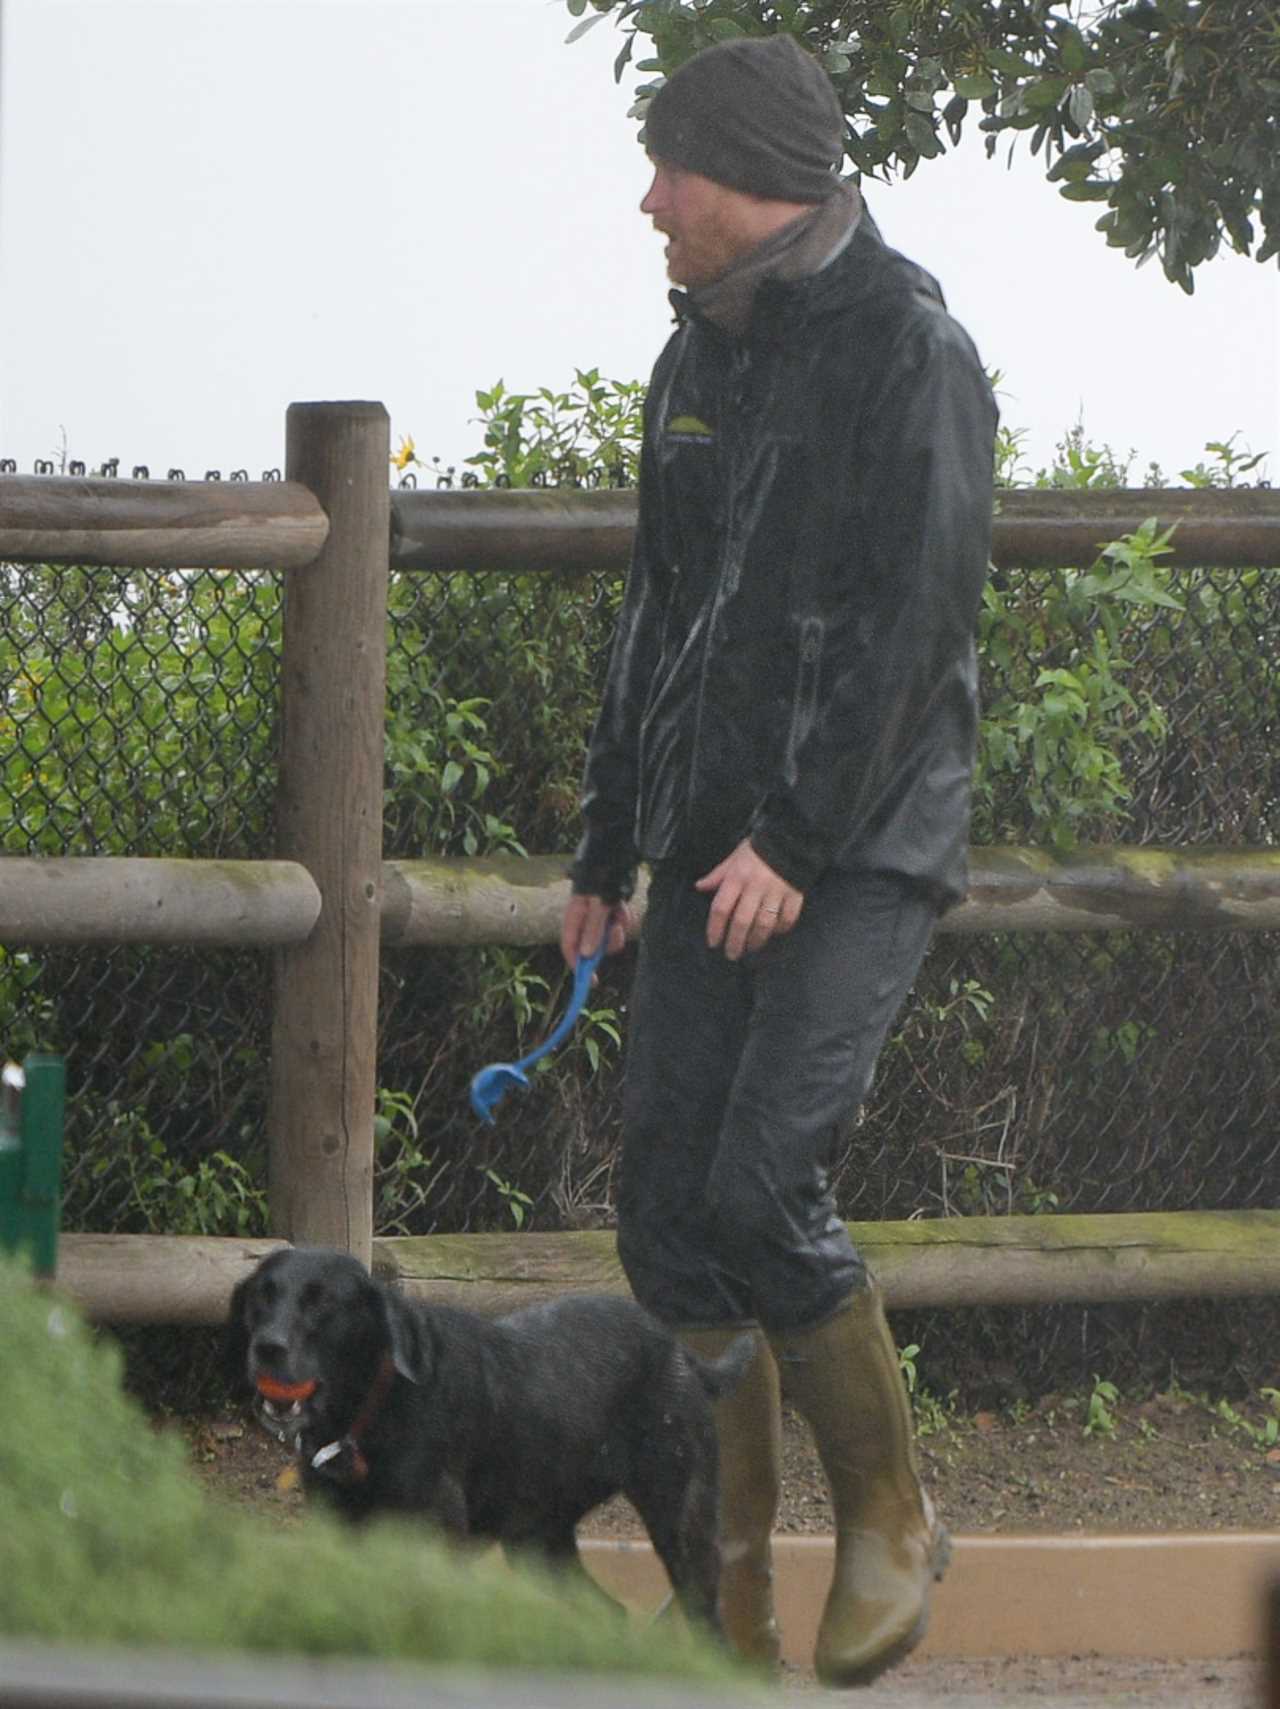 Prince Harry seen on dog walk as he breaks cover for first time after unleashing explosive claims William attacked him